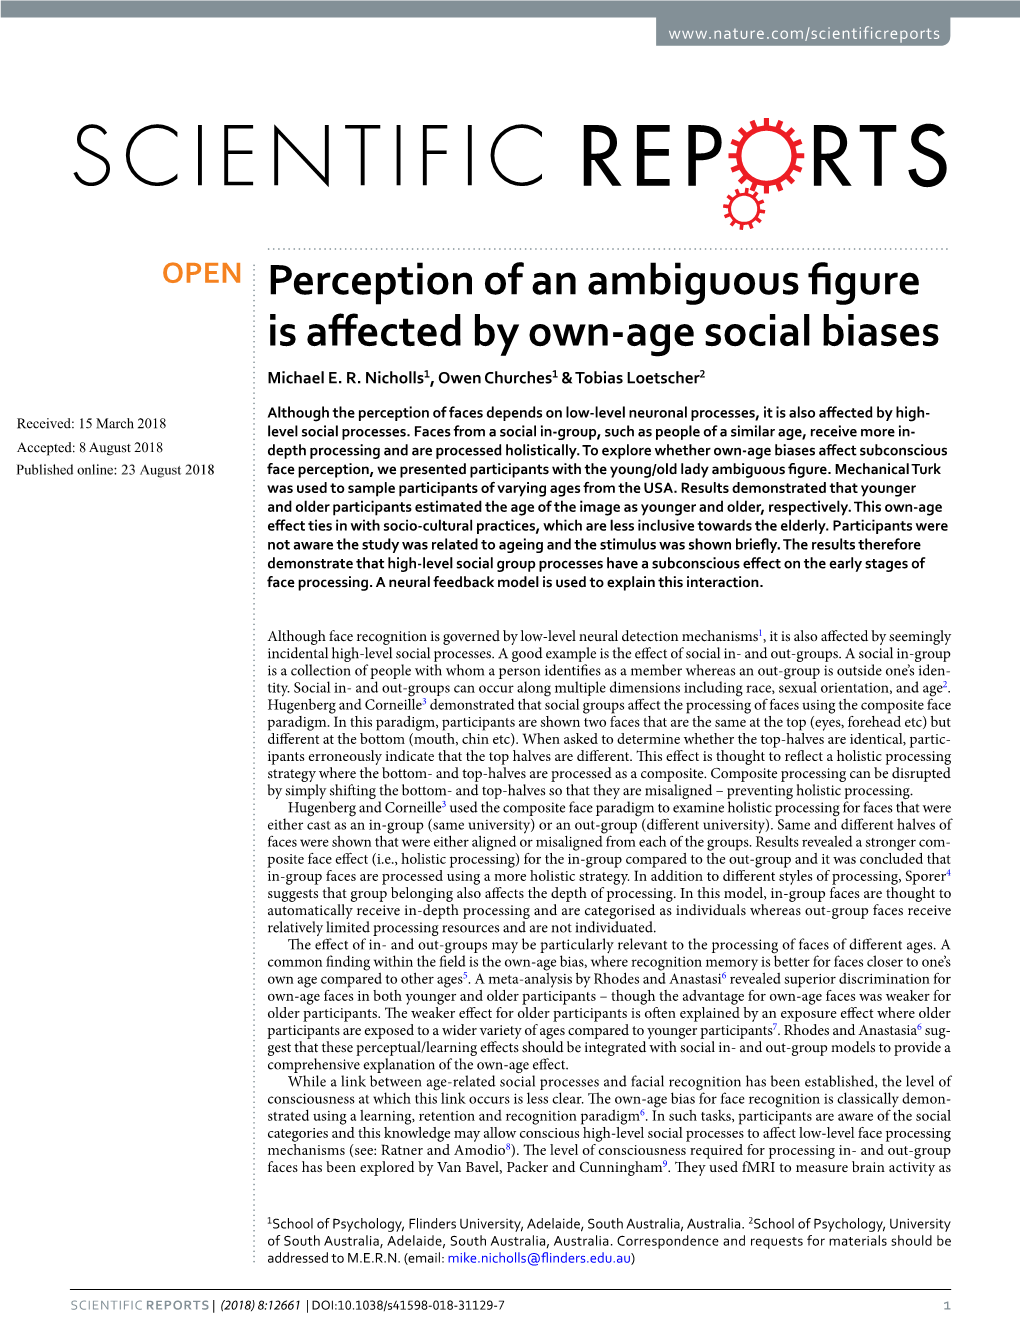 Perception of an Ambiguous Figure Is Affected by Own-Age Social Biases